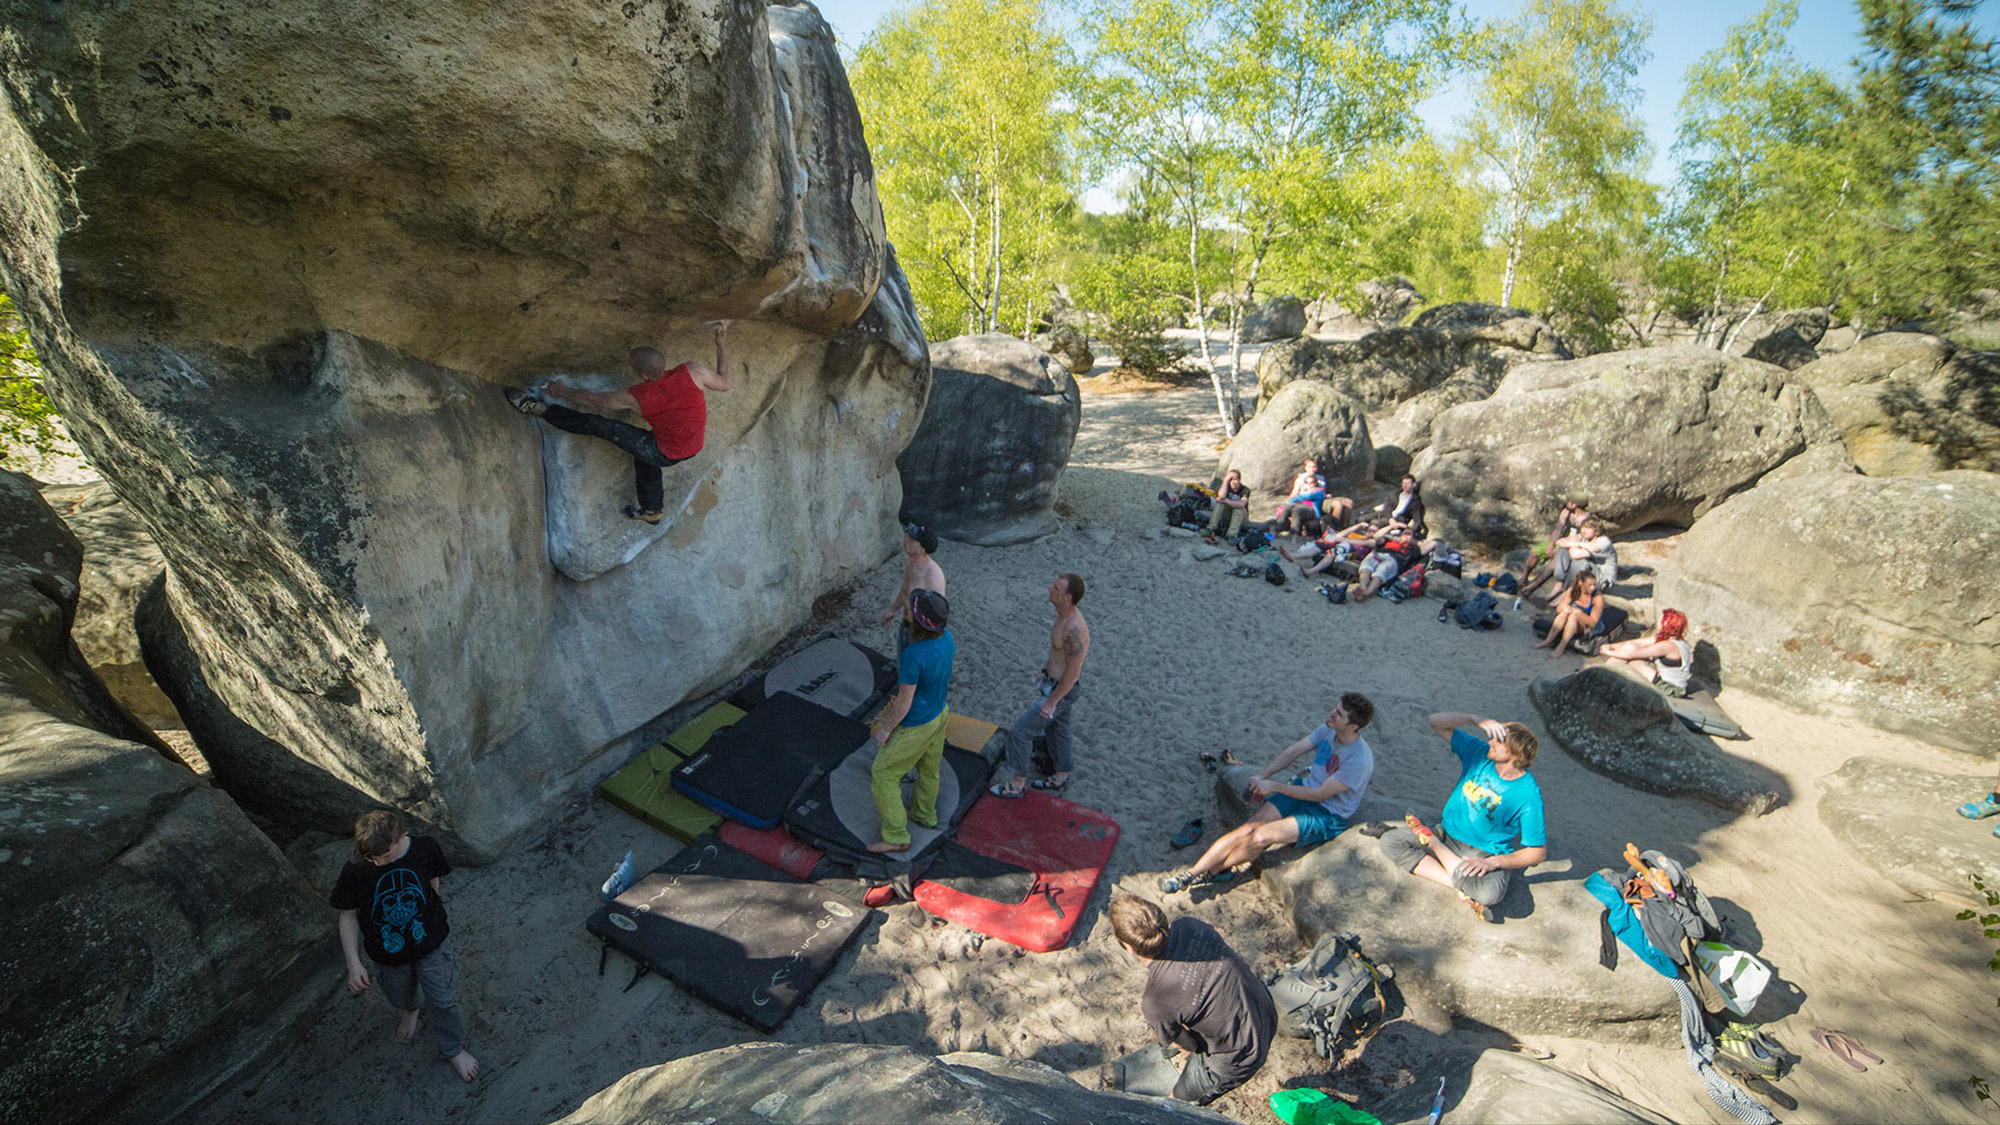 bouldering in the bas cuvier area of the Fontainebleau forest